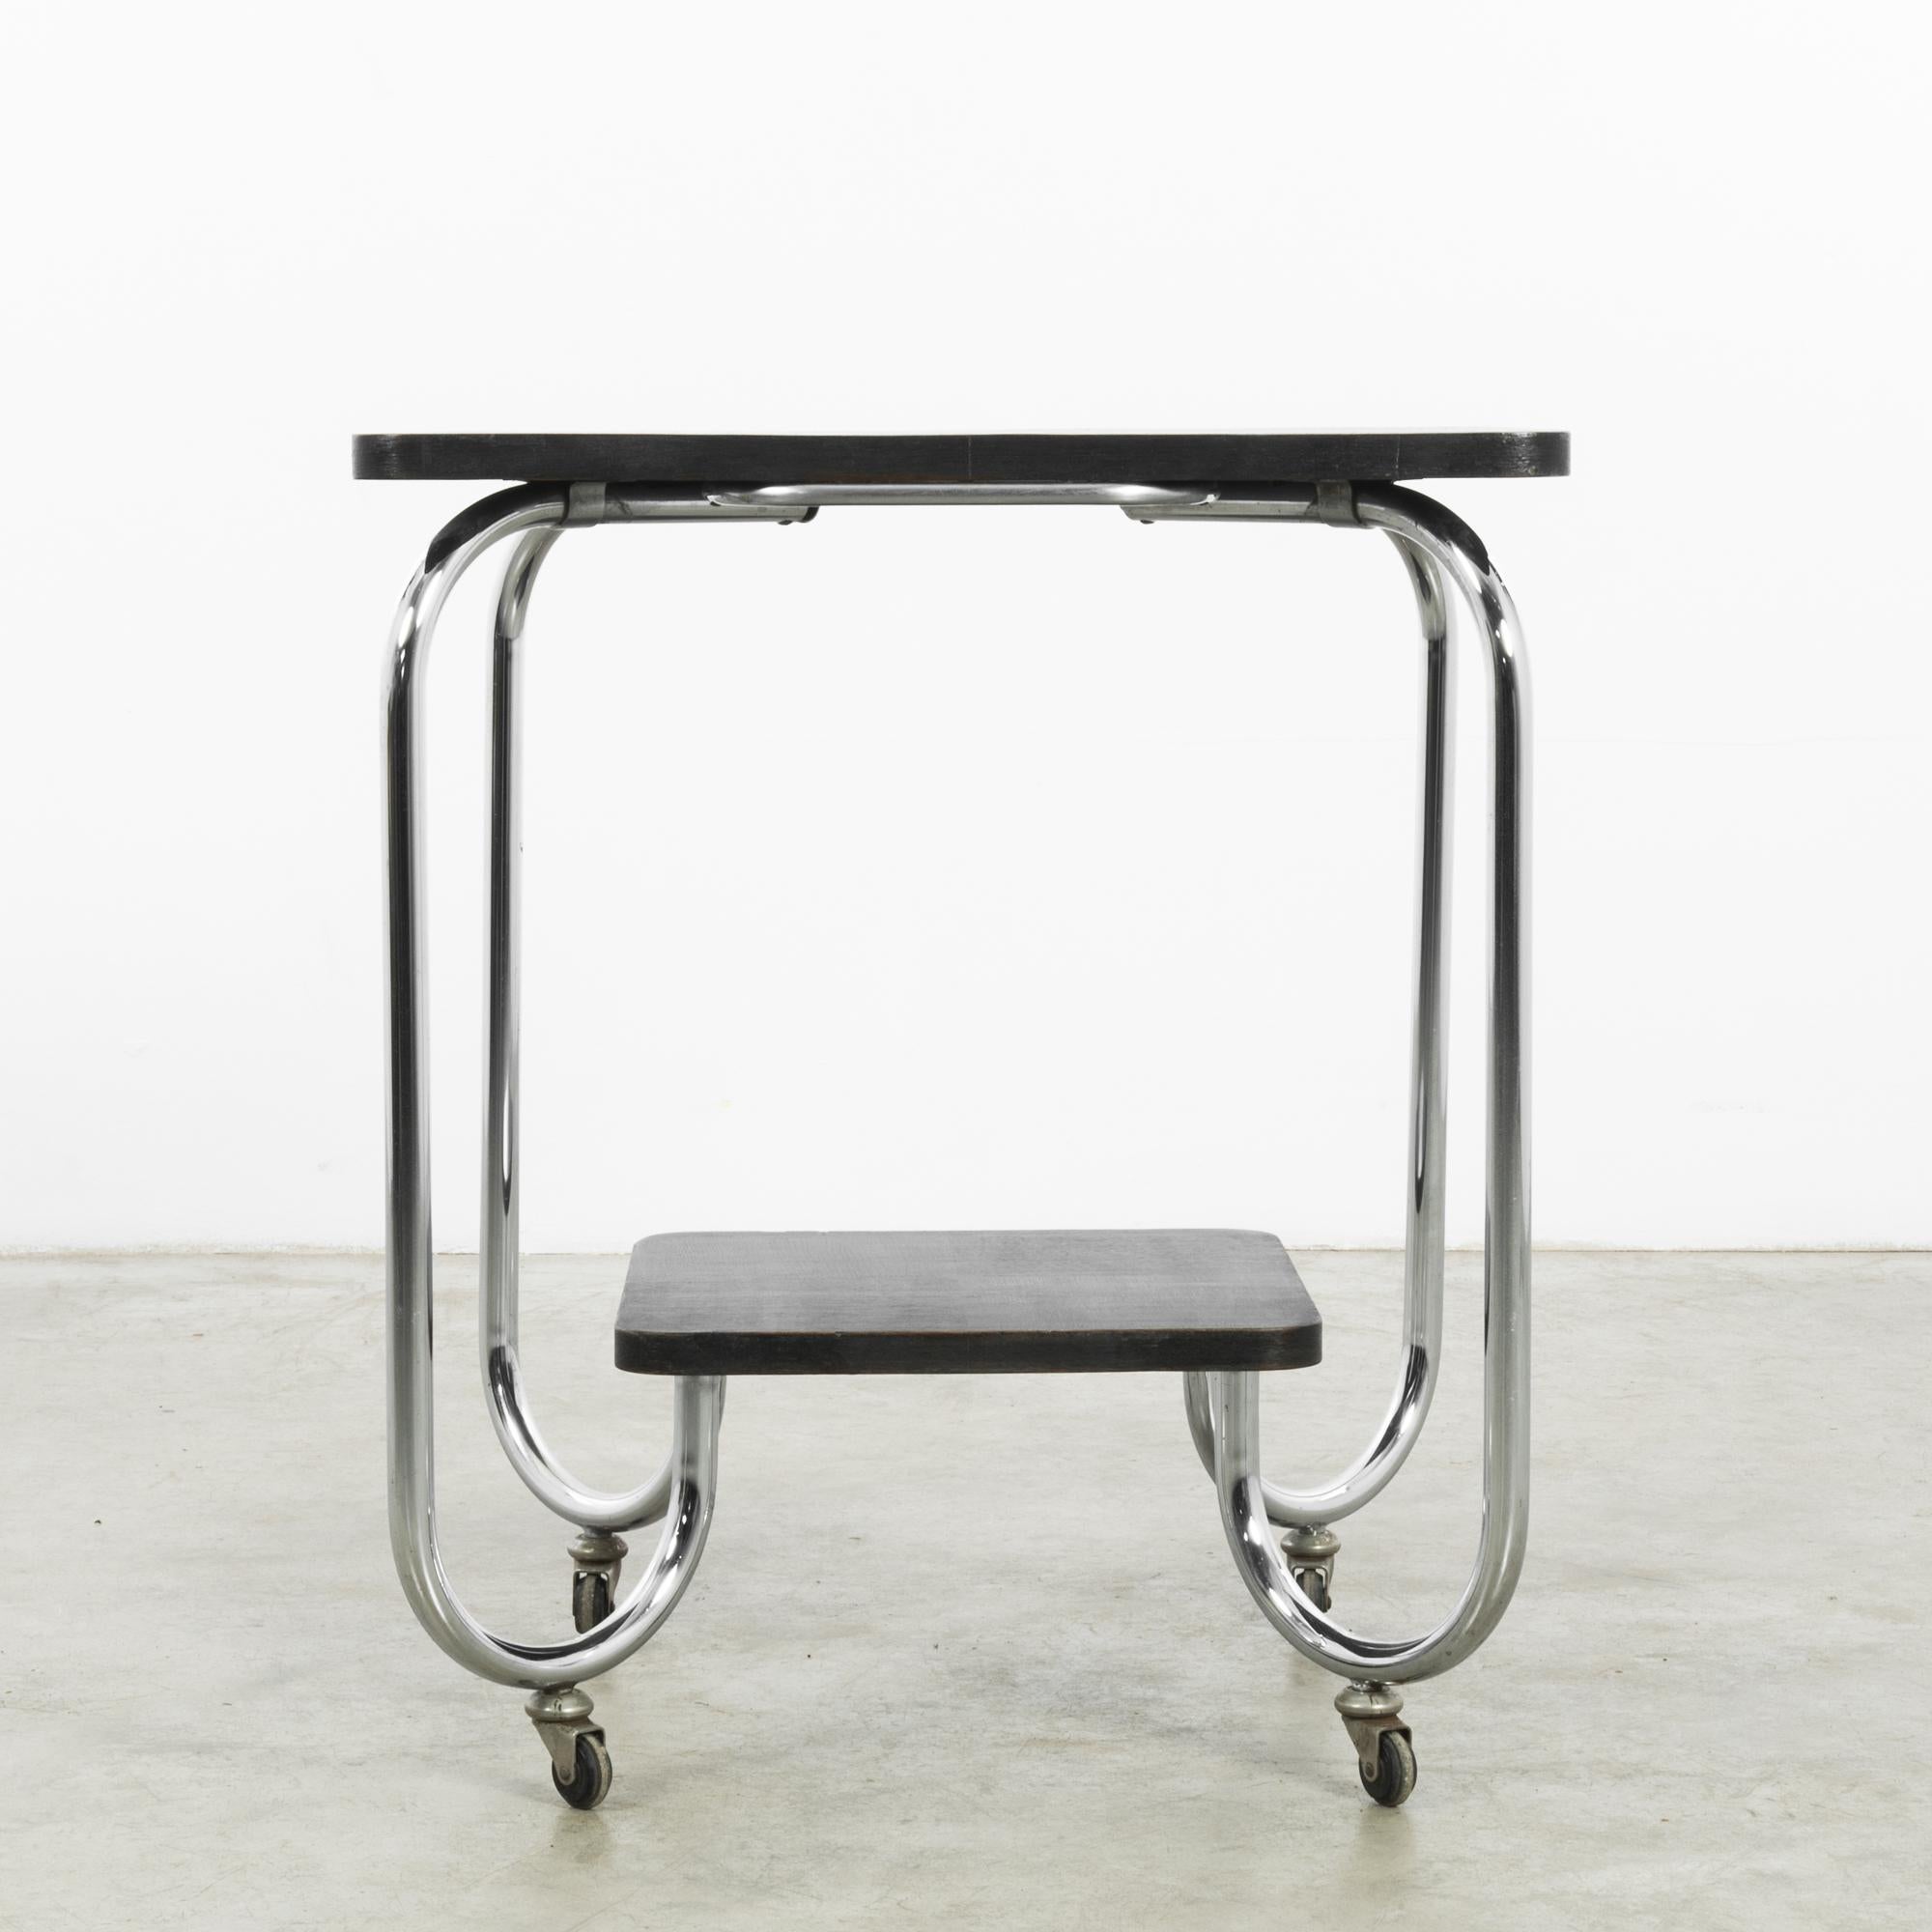 This 1920s German Metal Table boasts a classic vintage design, featuring a sleek, tubular metal frame that supports a rich wooden top. Its compact structure is heightened by the functional addition of wheels, making it a versatile piece for any